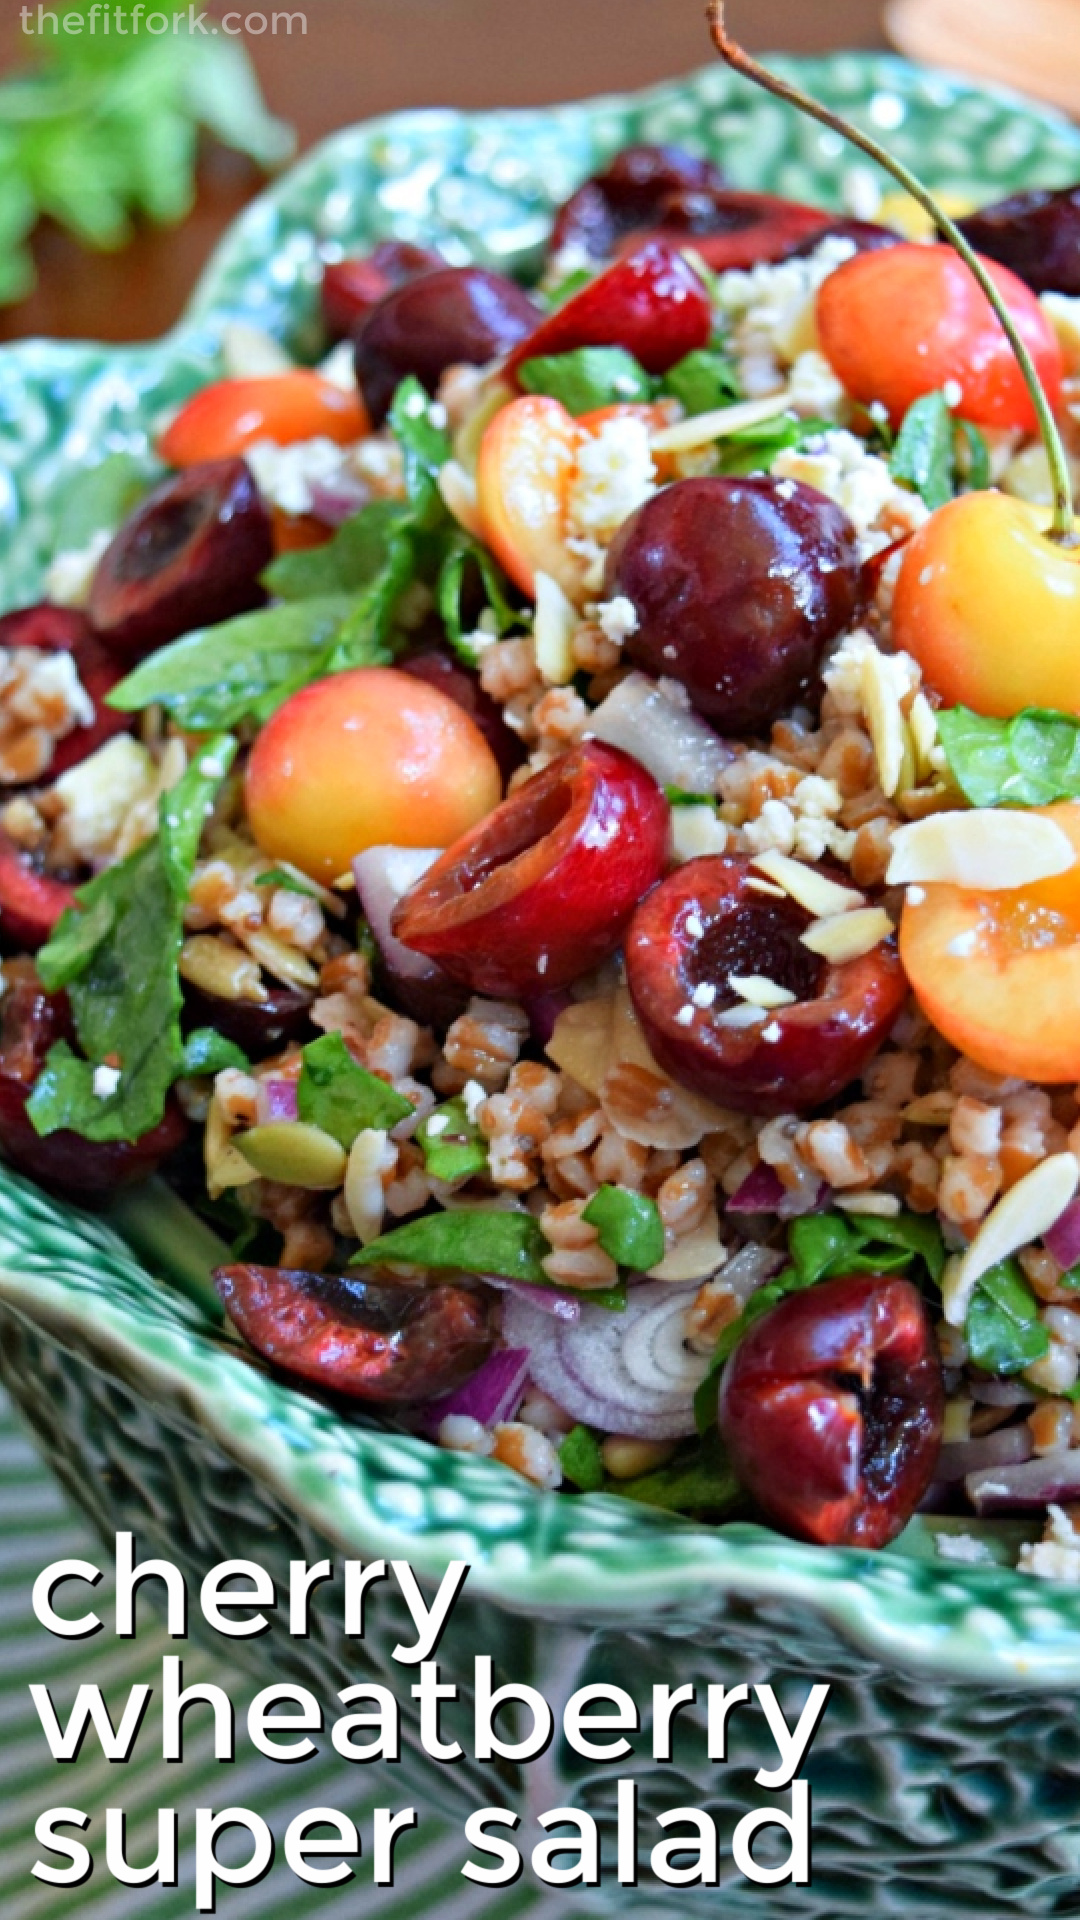 Cherry Wheat Berry Super SaladLife is like a bowl of cherries . . . tossed with seeds, whole grains and greens! This easy summer salad recipe is perfect for picnic, pool party or potluck -- even meal prepping.